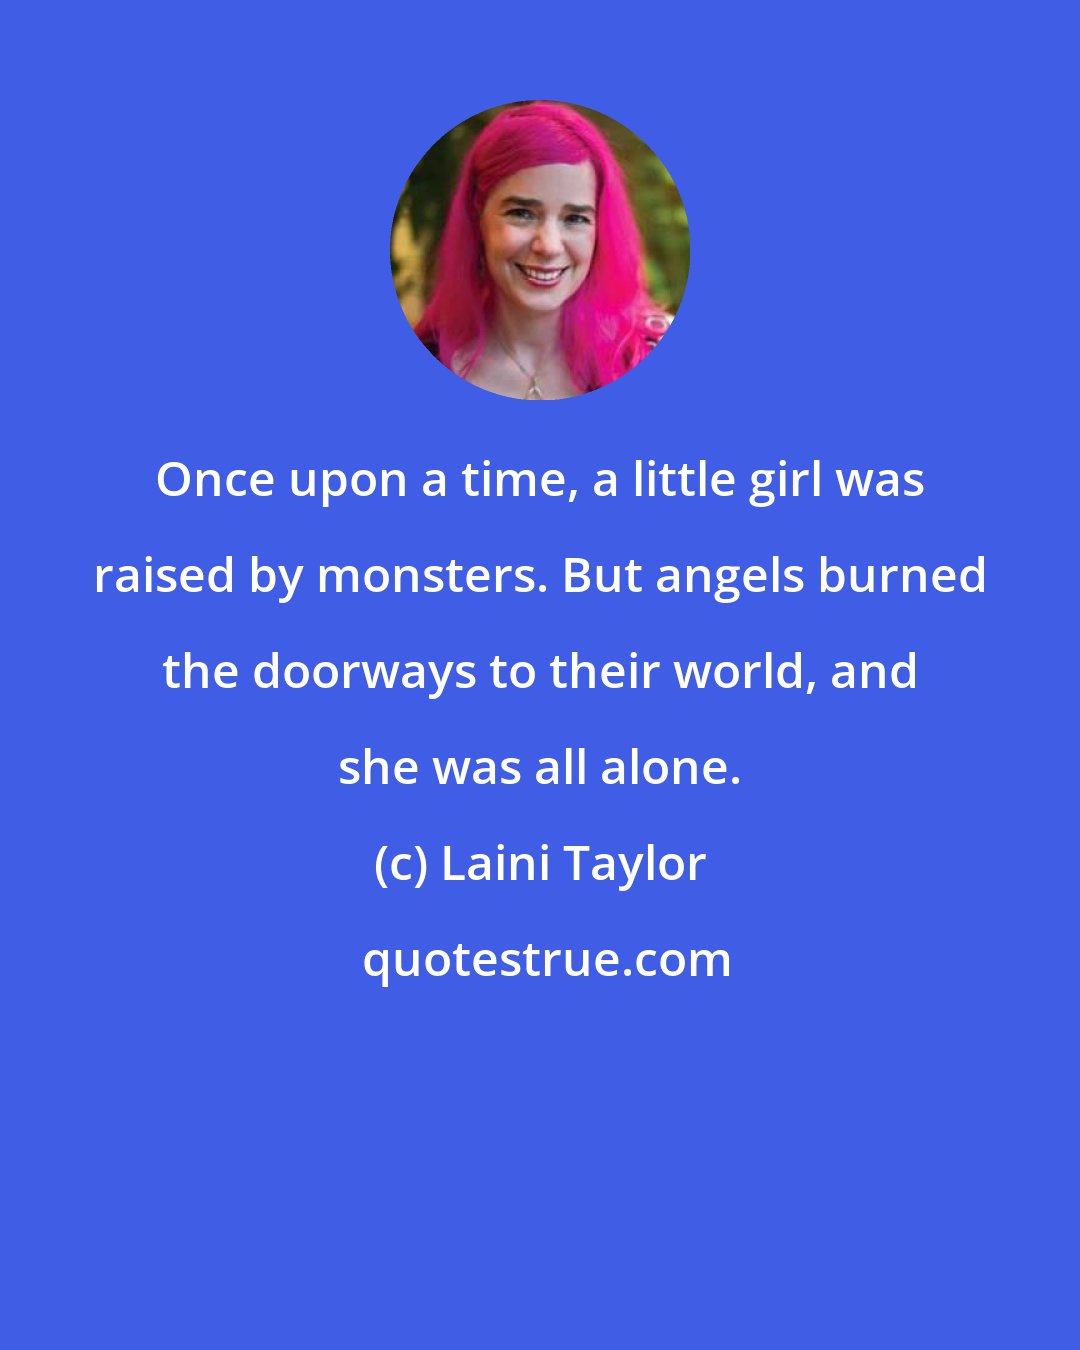 Laini Taylor: Once upon a time, a little girl was raised by monsters. But angels burned the doorways to their world, and she was all alone.